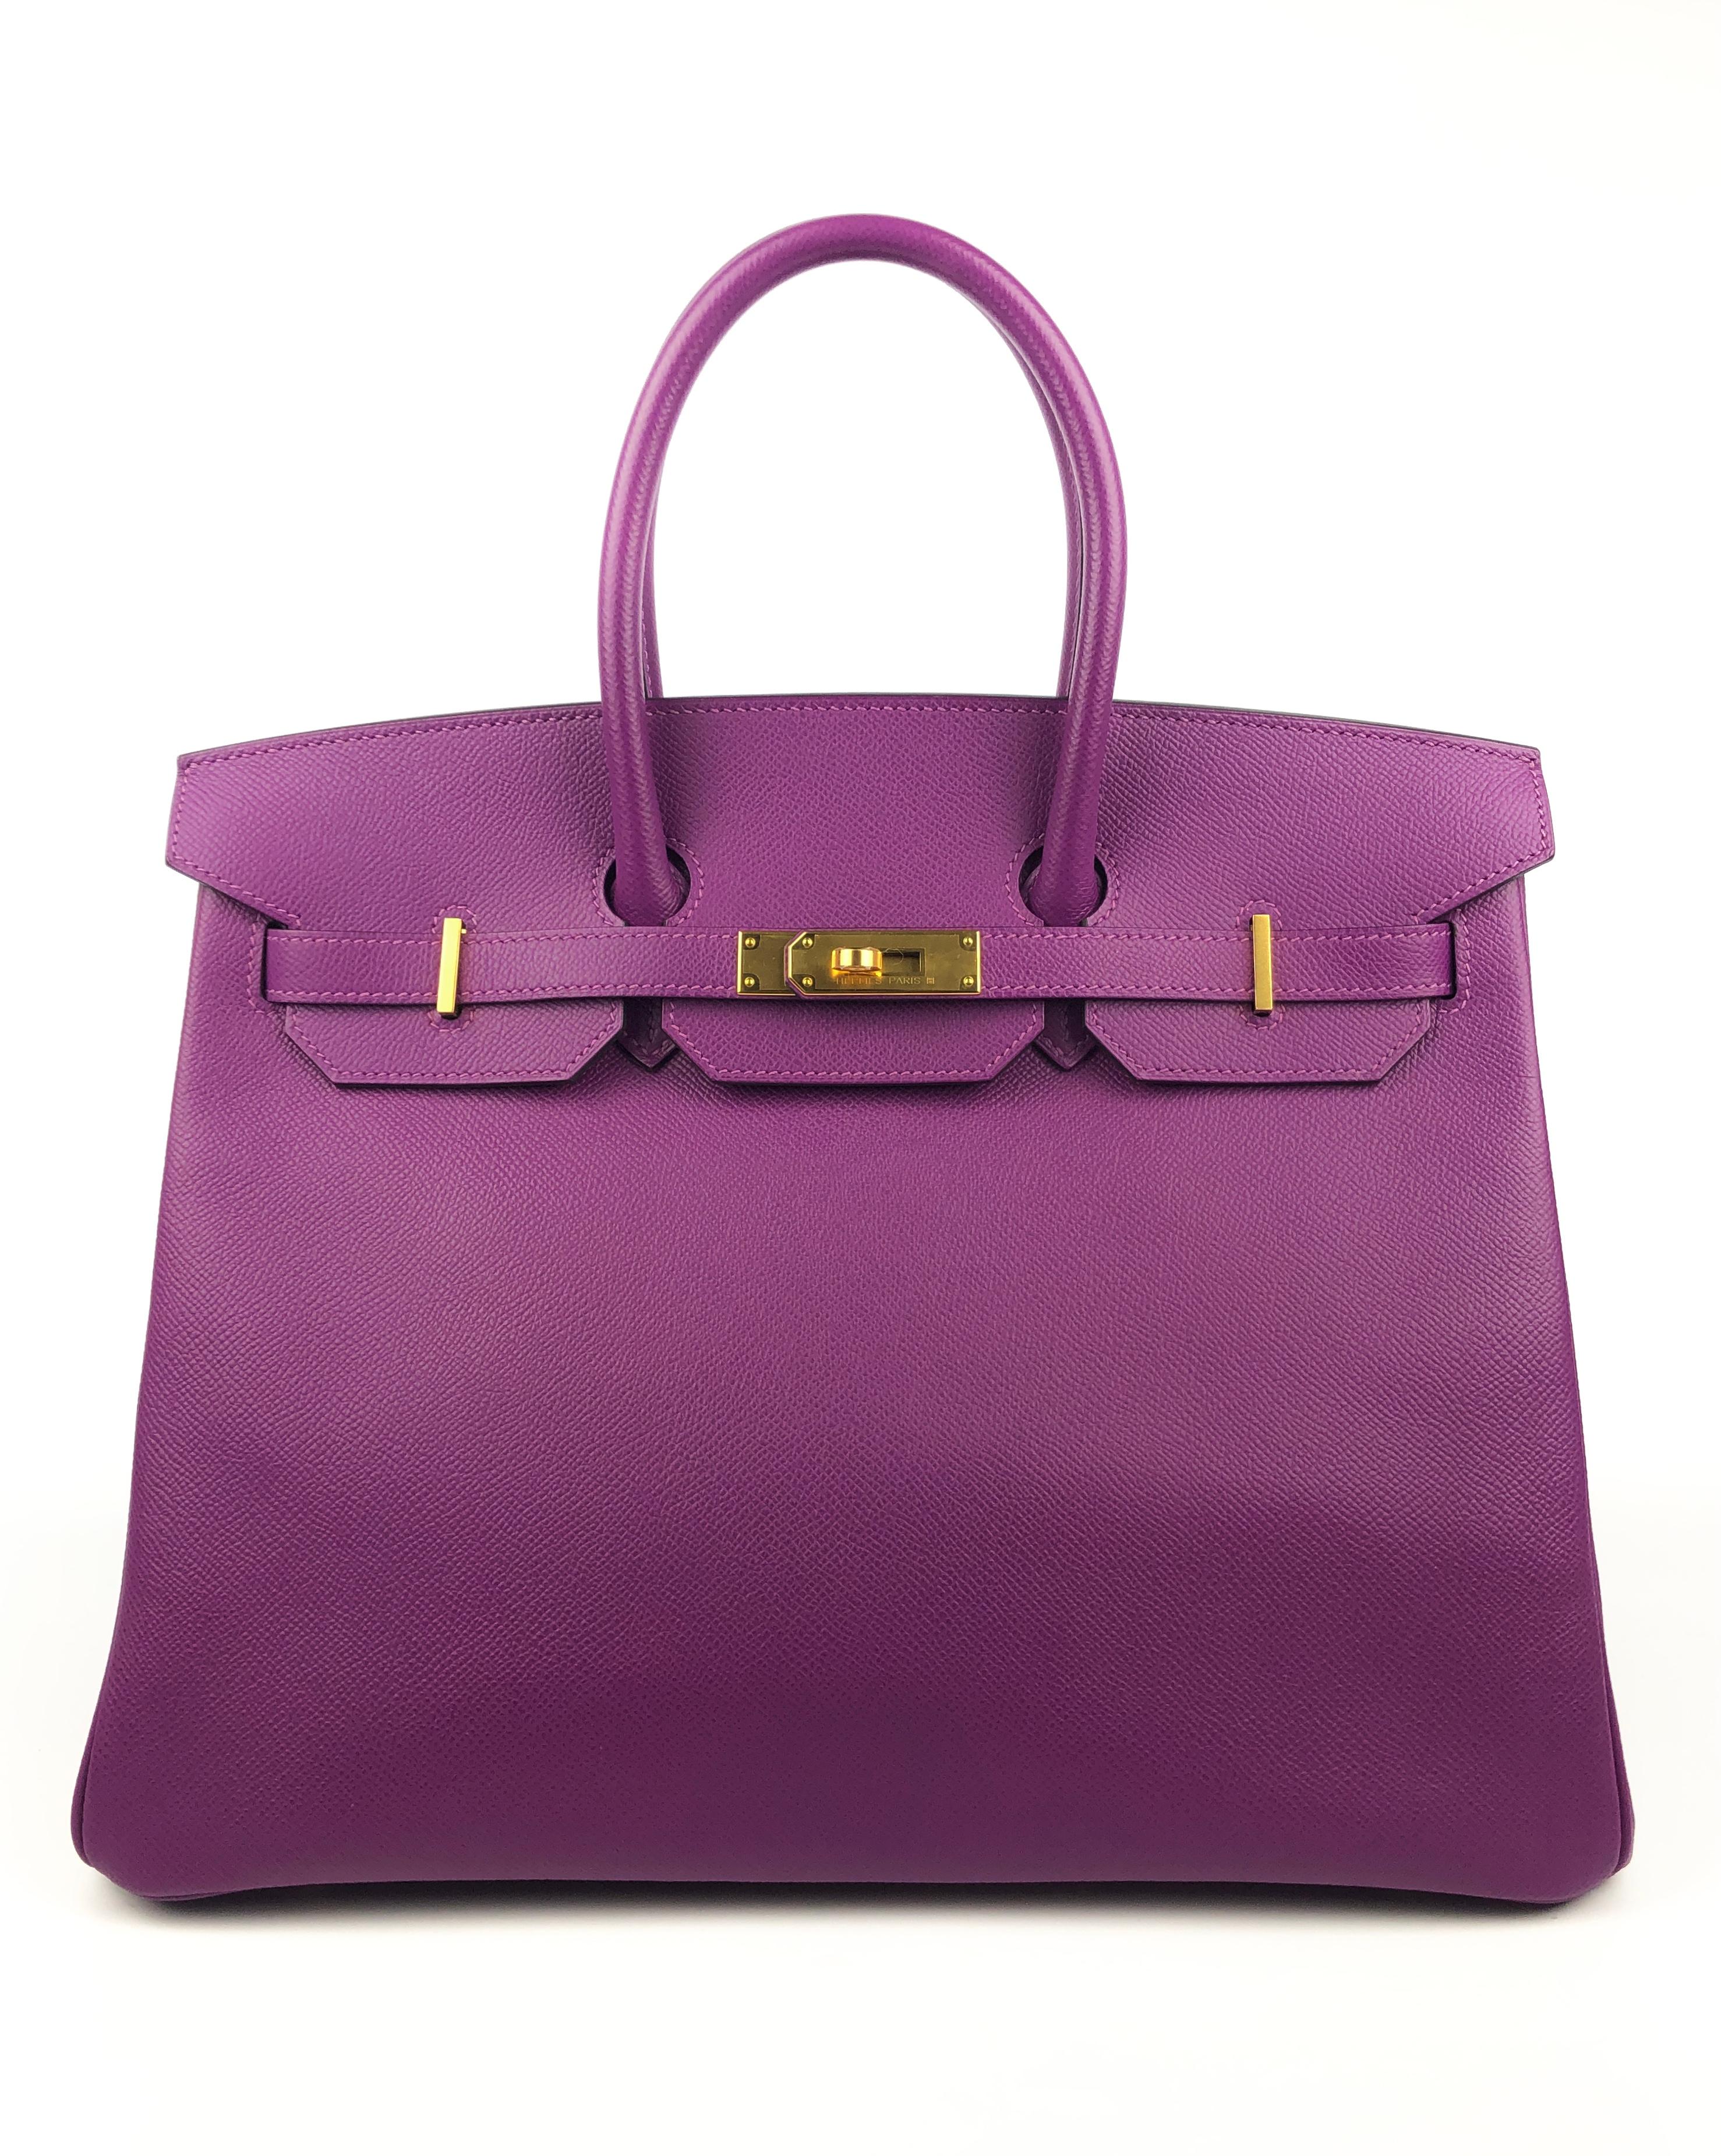 New Hermes Birkin 35 Anemone Purple Epsom Gold Hardware 2020 Y Stamp. Includes all accessories but no box. 

Shop with Confidence From Lux Addicts. Authenticity Guaranteed!